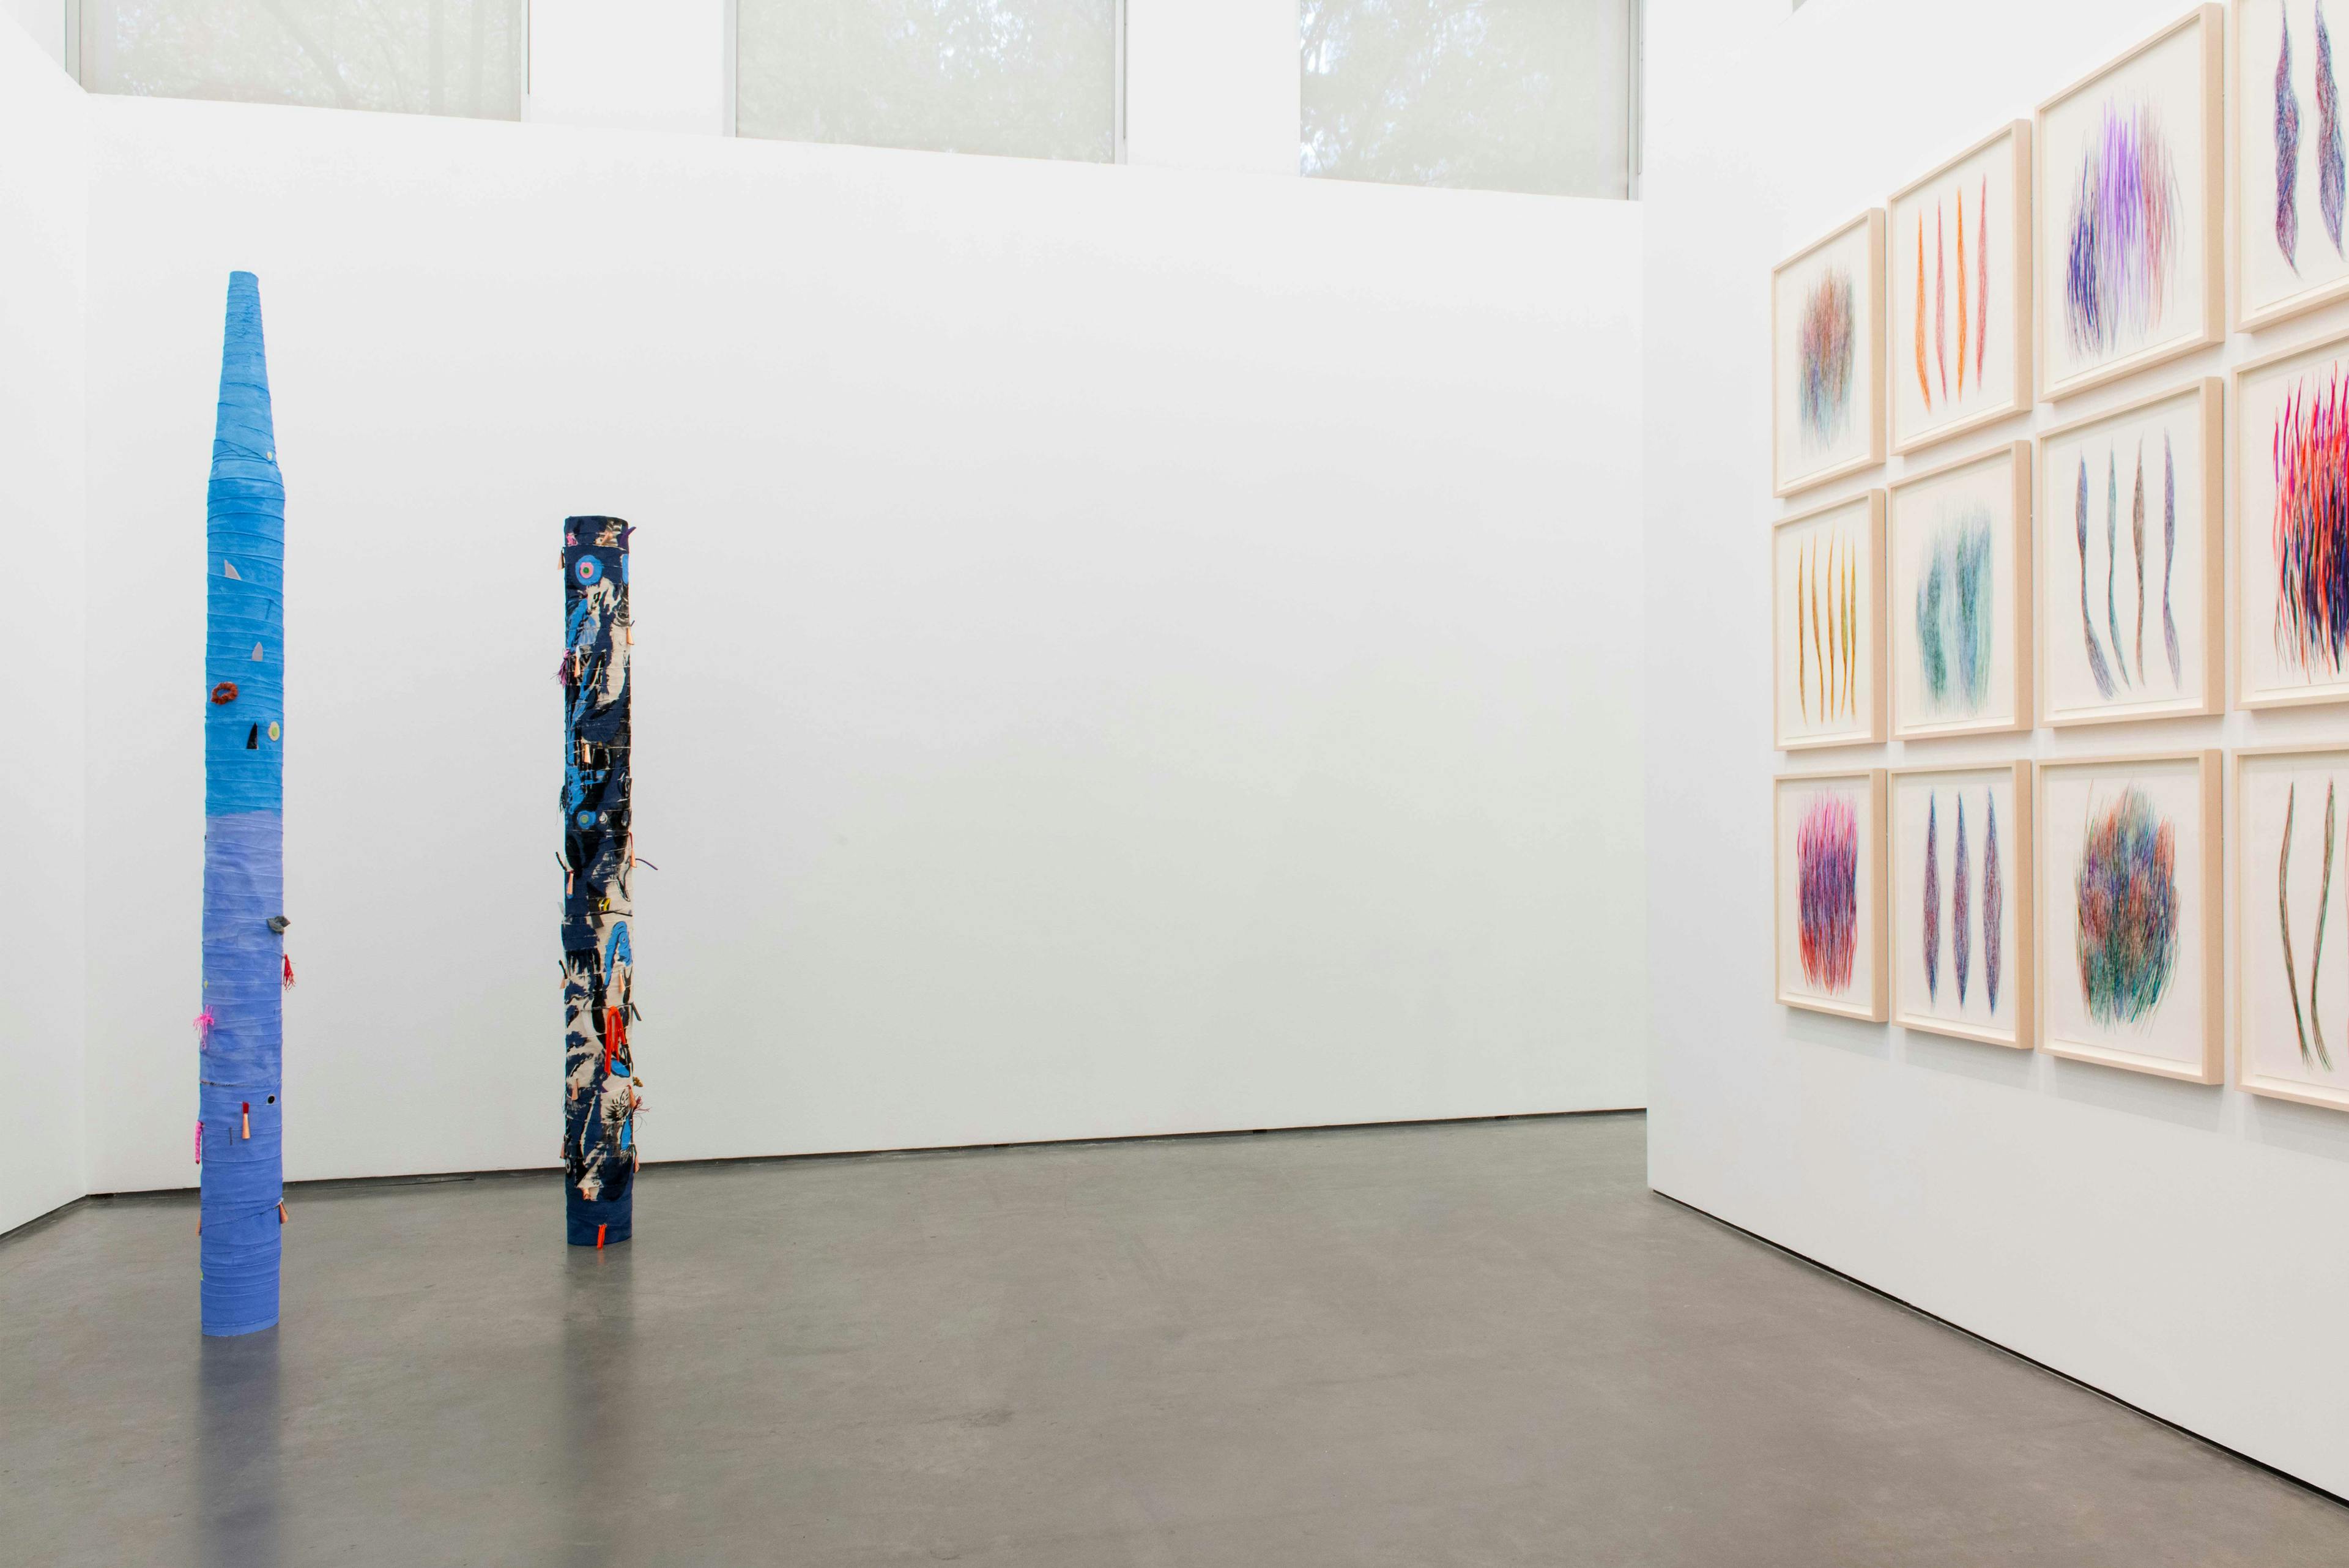 This is an installation view of Charlene Vickers’ solo exhibition. Across from the wall on which a series of drawings are mounted are two tall cylindrical sculptures wrapped in painted fabric.